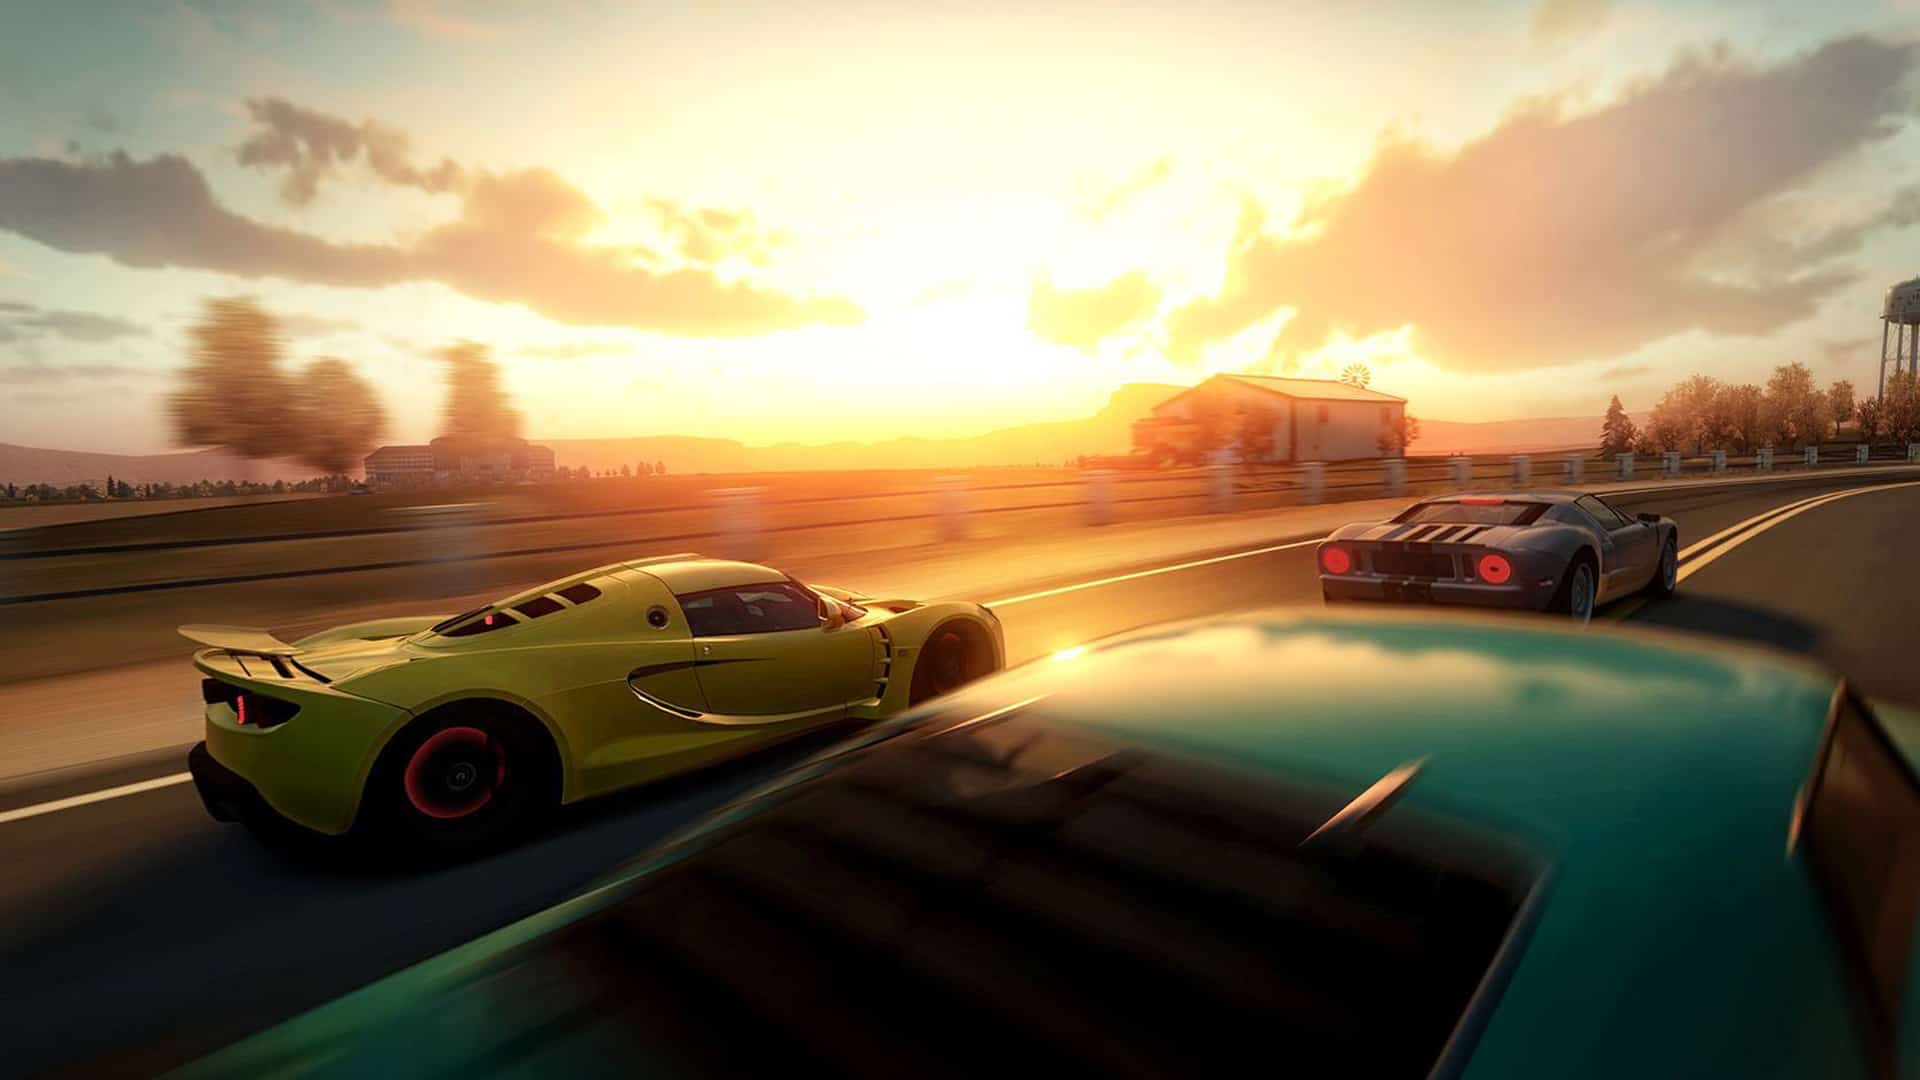 Revisiting: Forza Horizon 1 (Xbox 360) - 2 Hours of Gameplay 